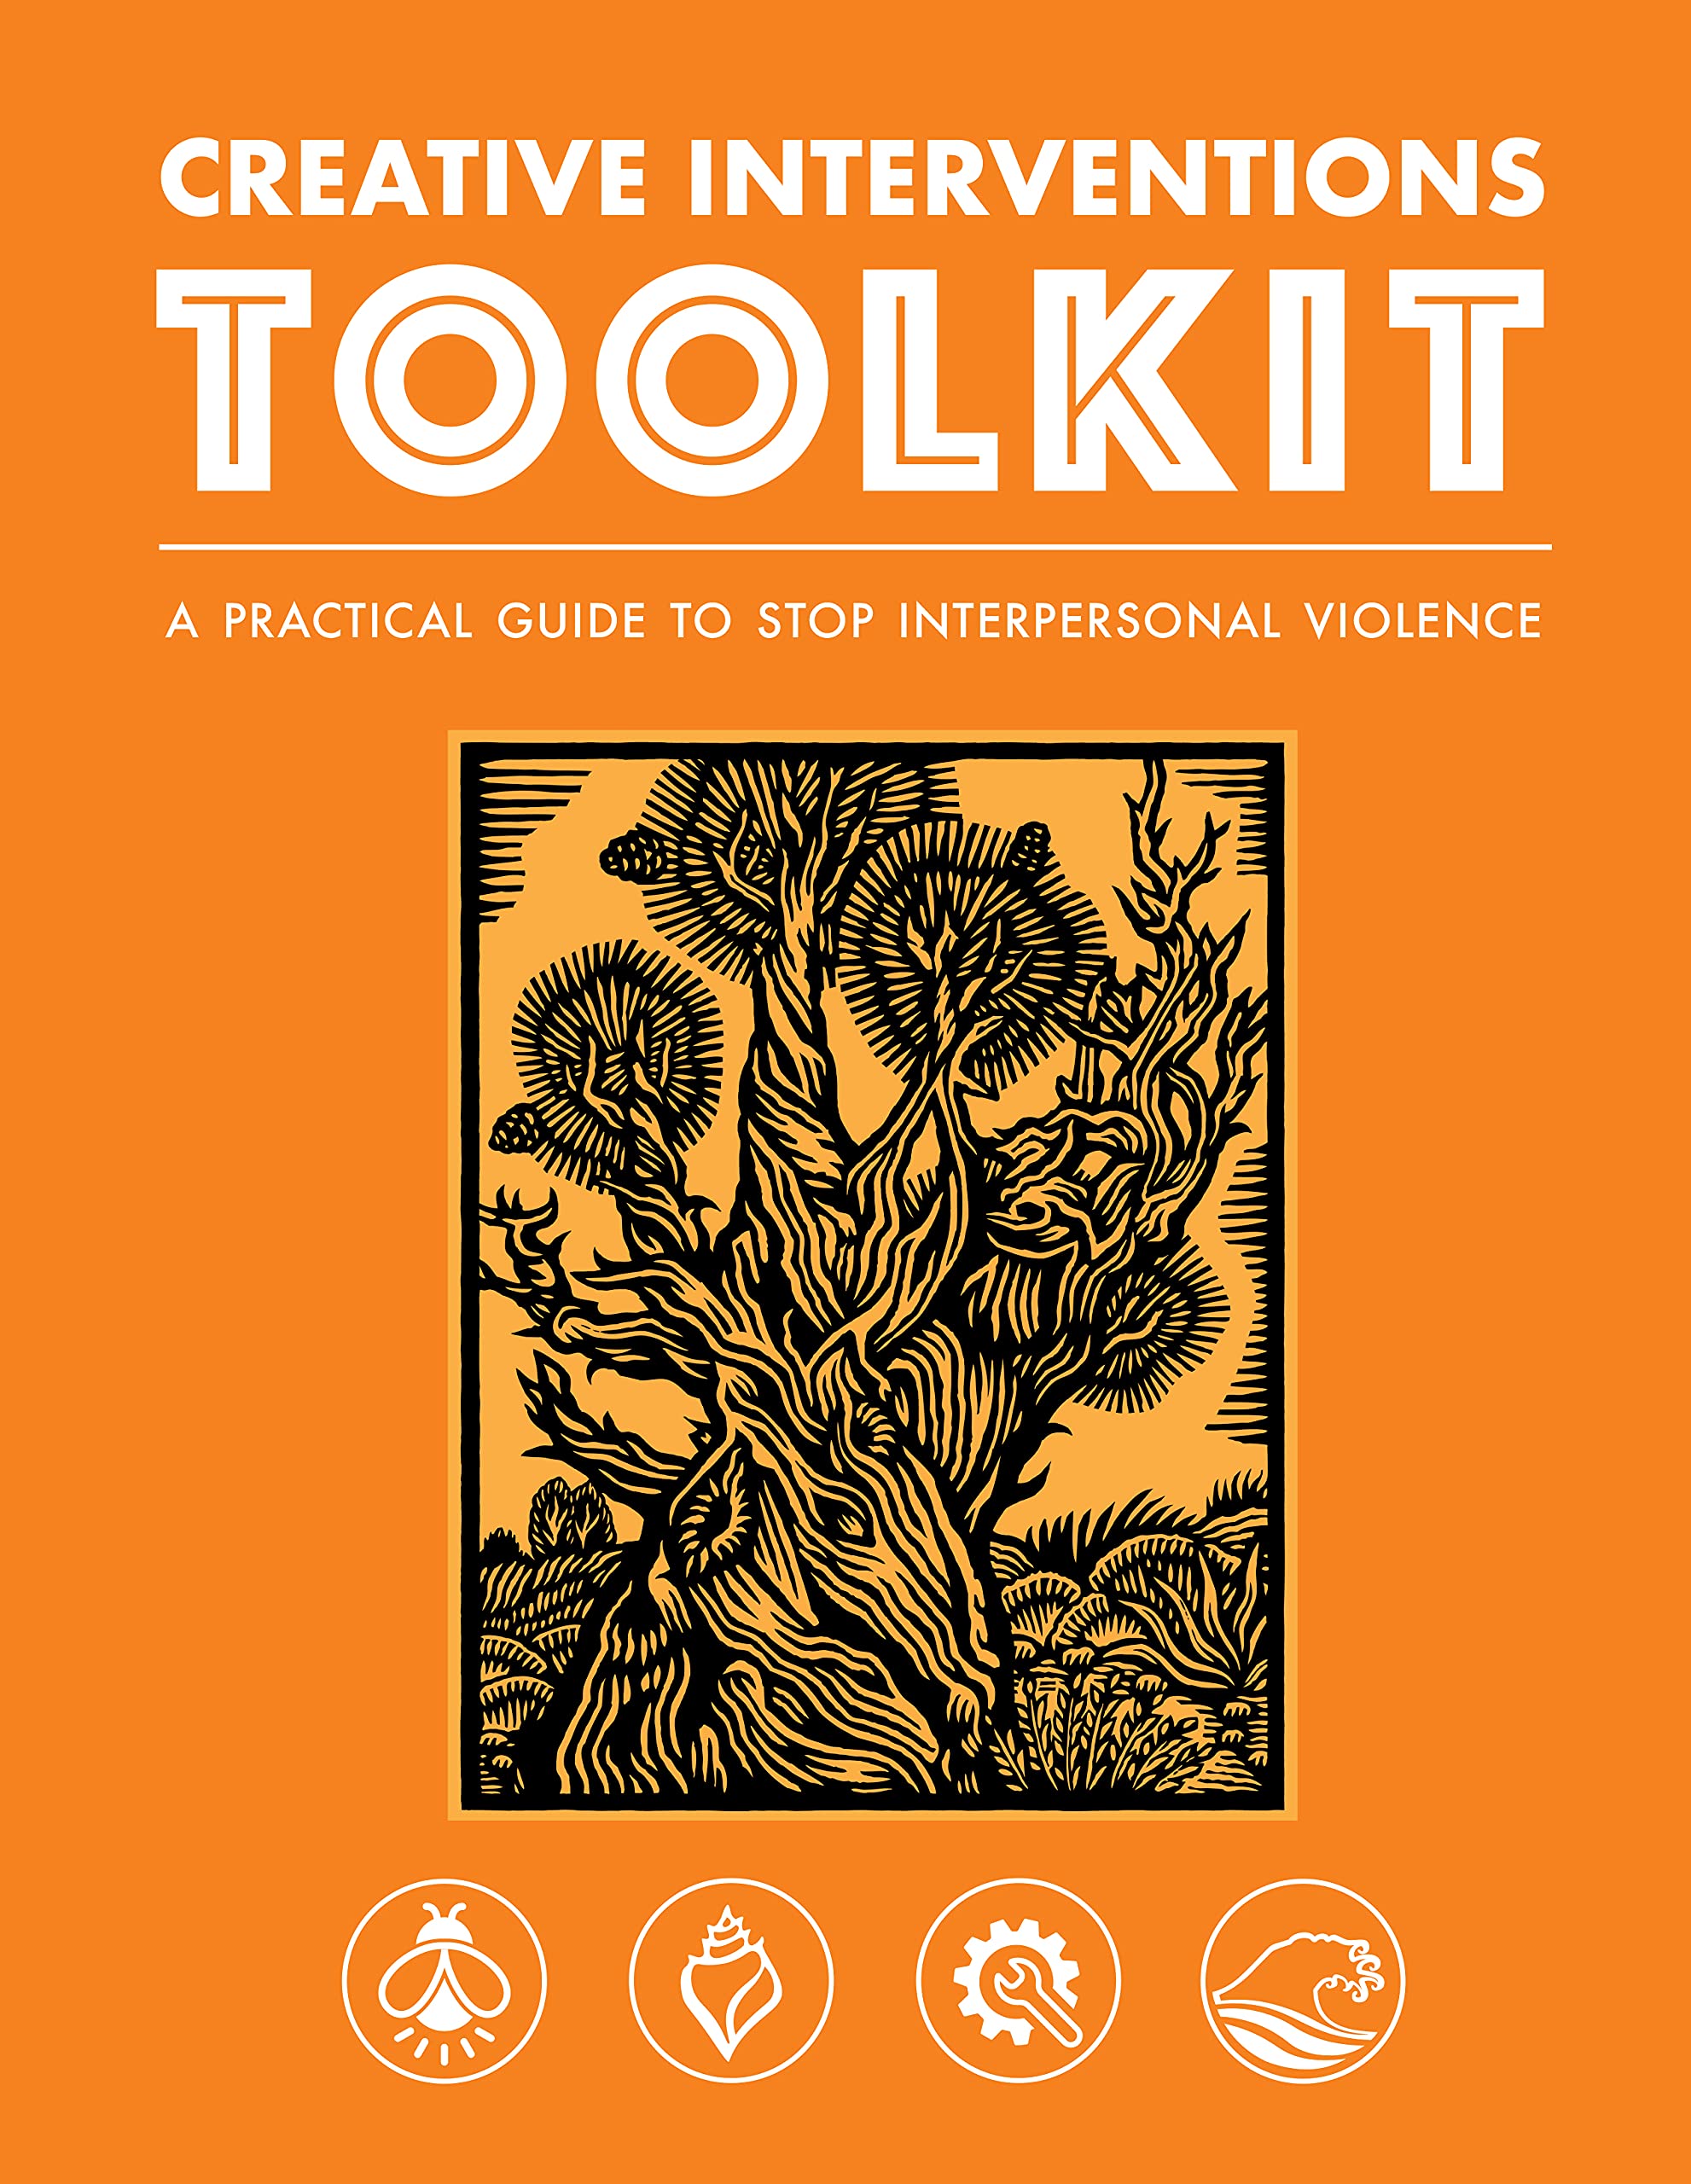 Creative Interventions Toolkit: A Practical Guide to Stop Interpersonal Violence (Paperback)